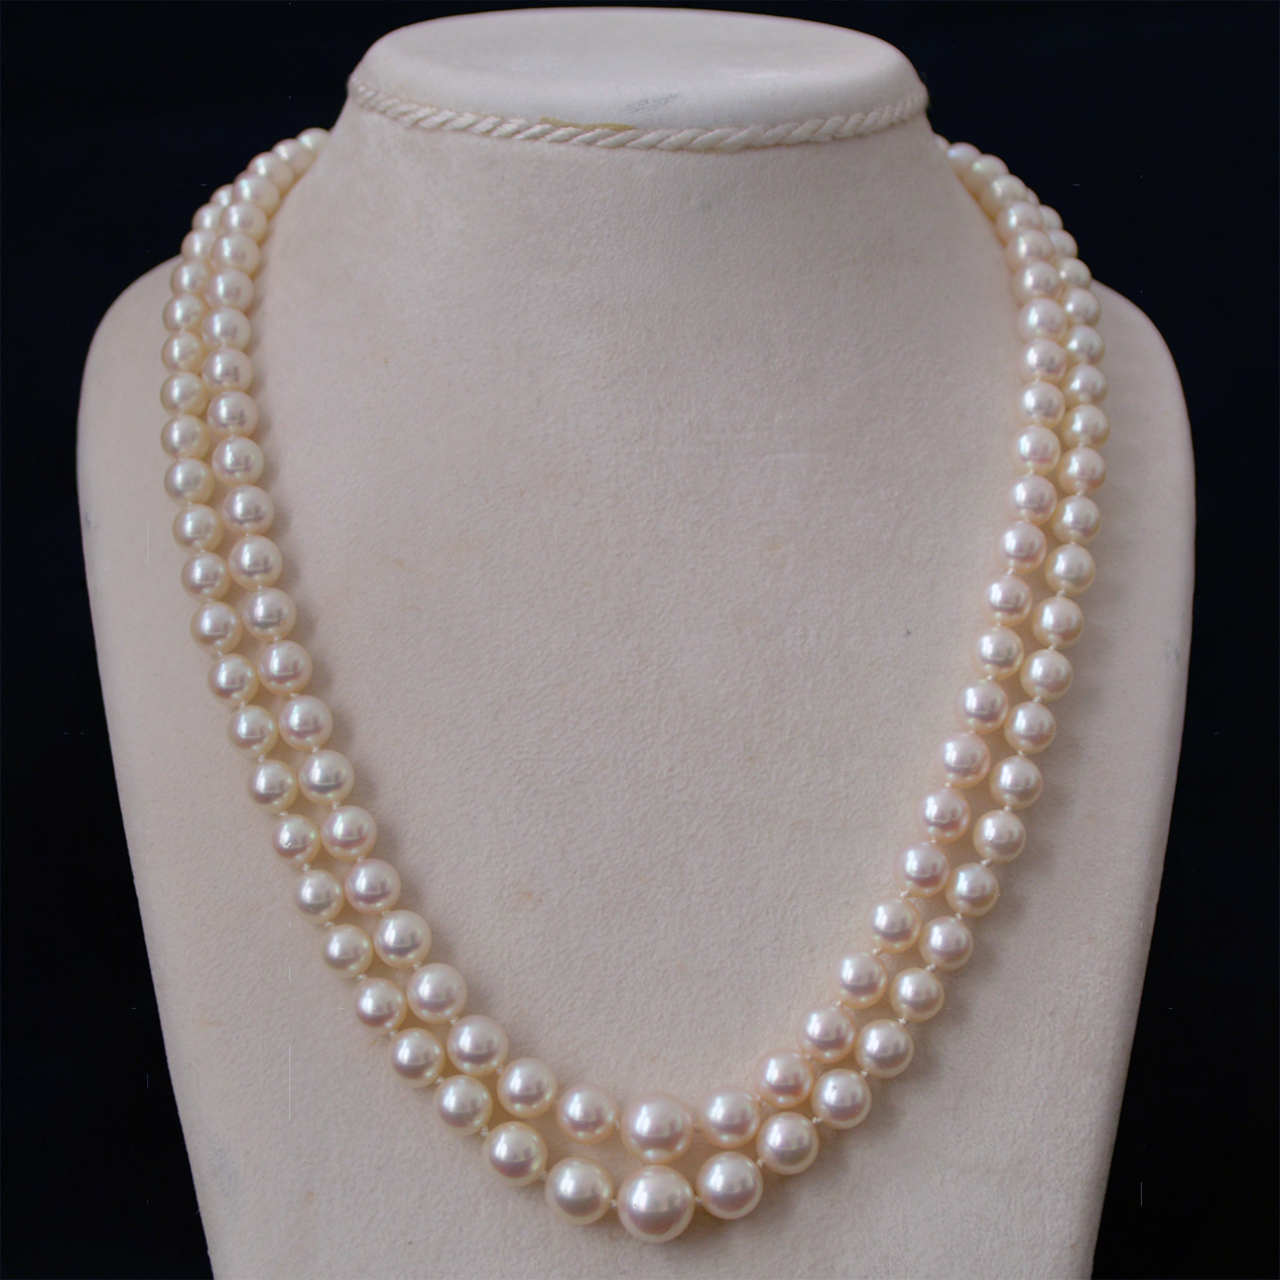 Share 155+ two pearl necklace - songngunhatanh.edu.vn